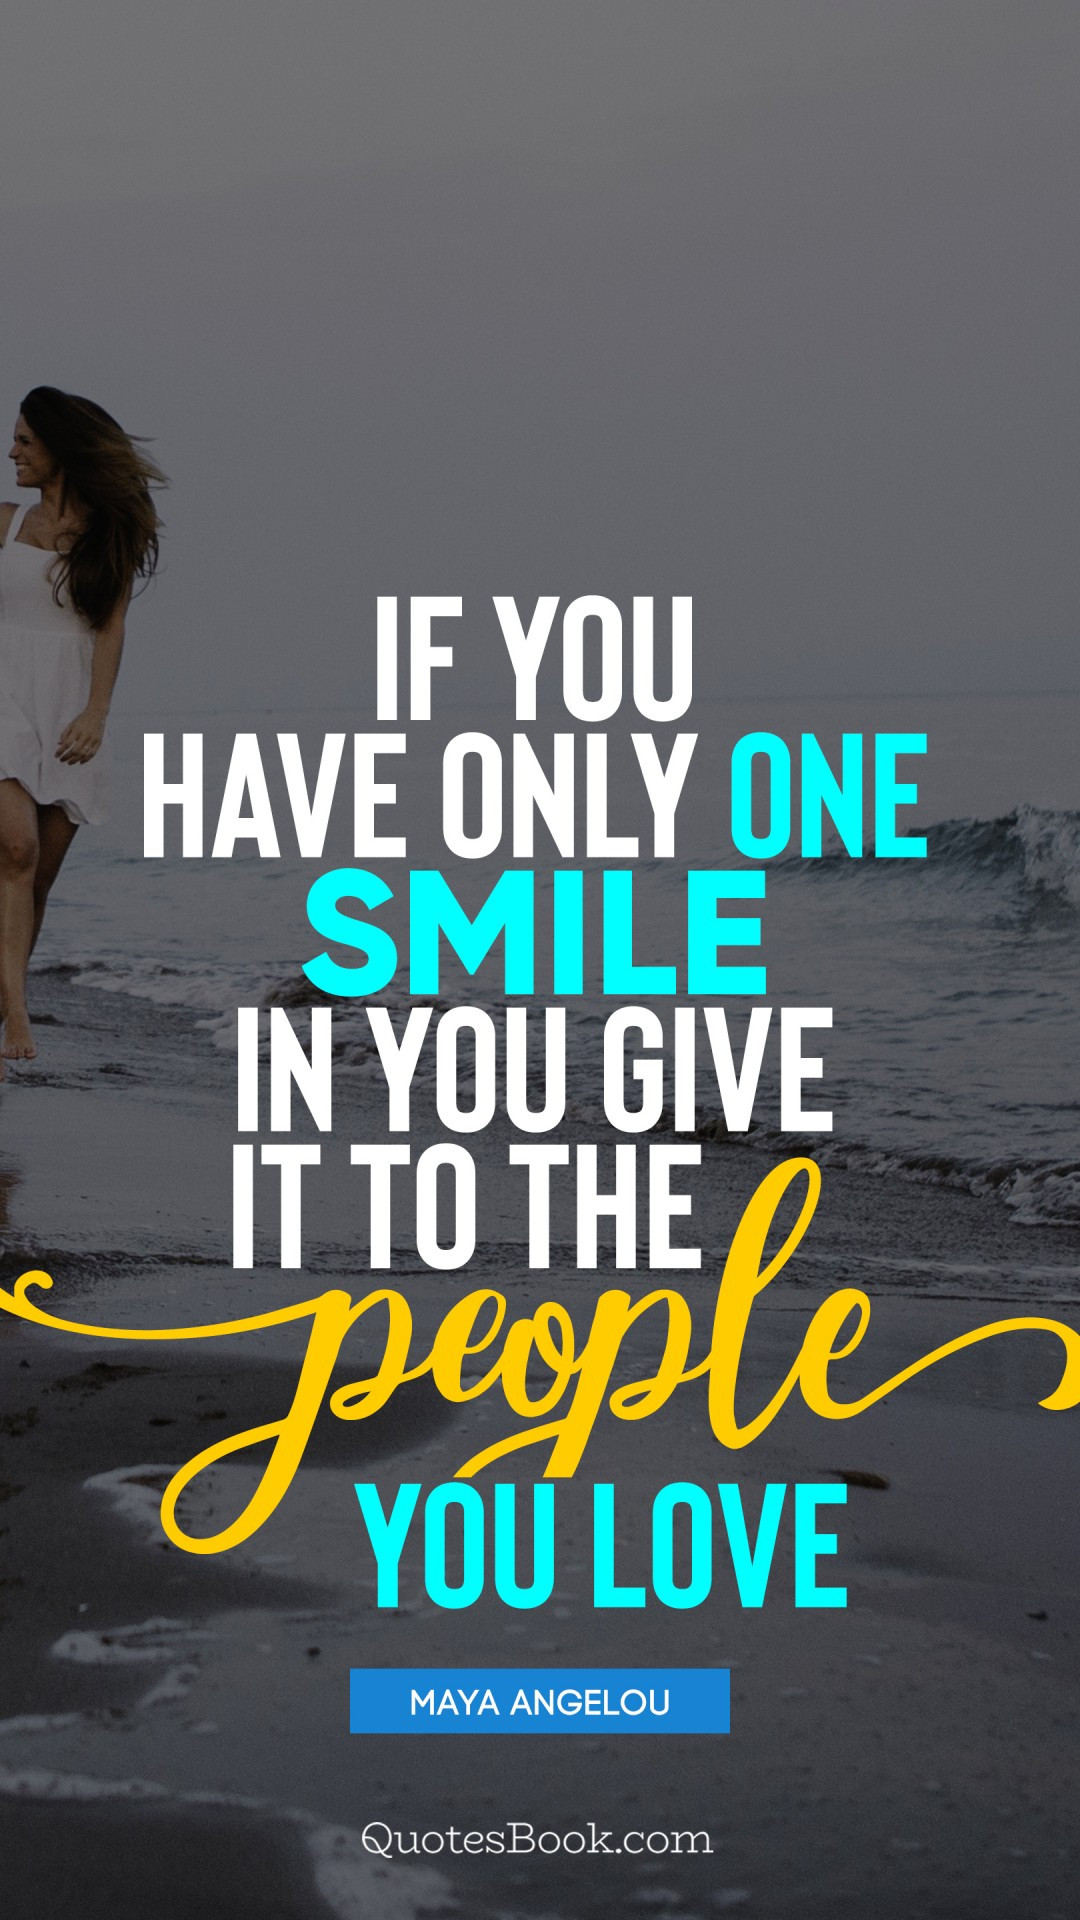 Quotes For The One You Love
 If you have only one smile in you give it to the people